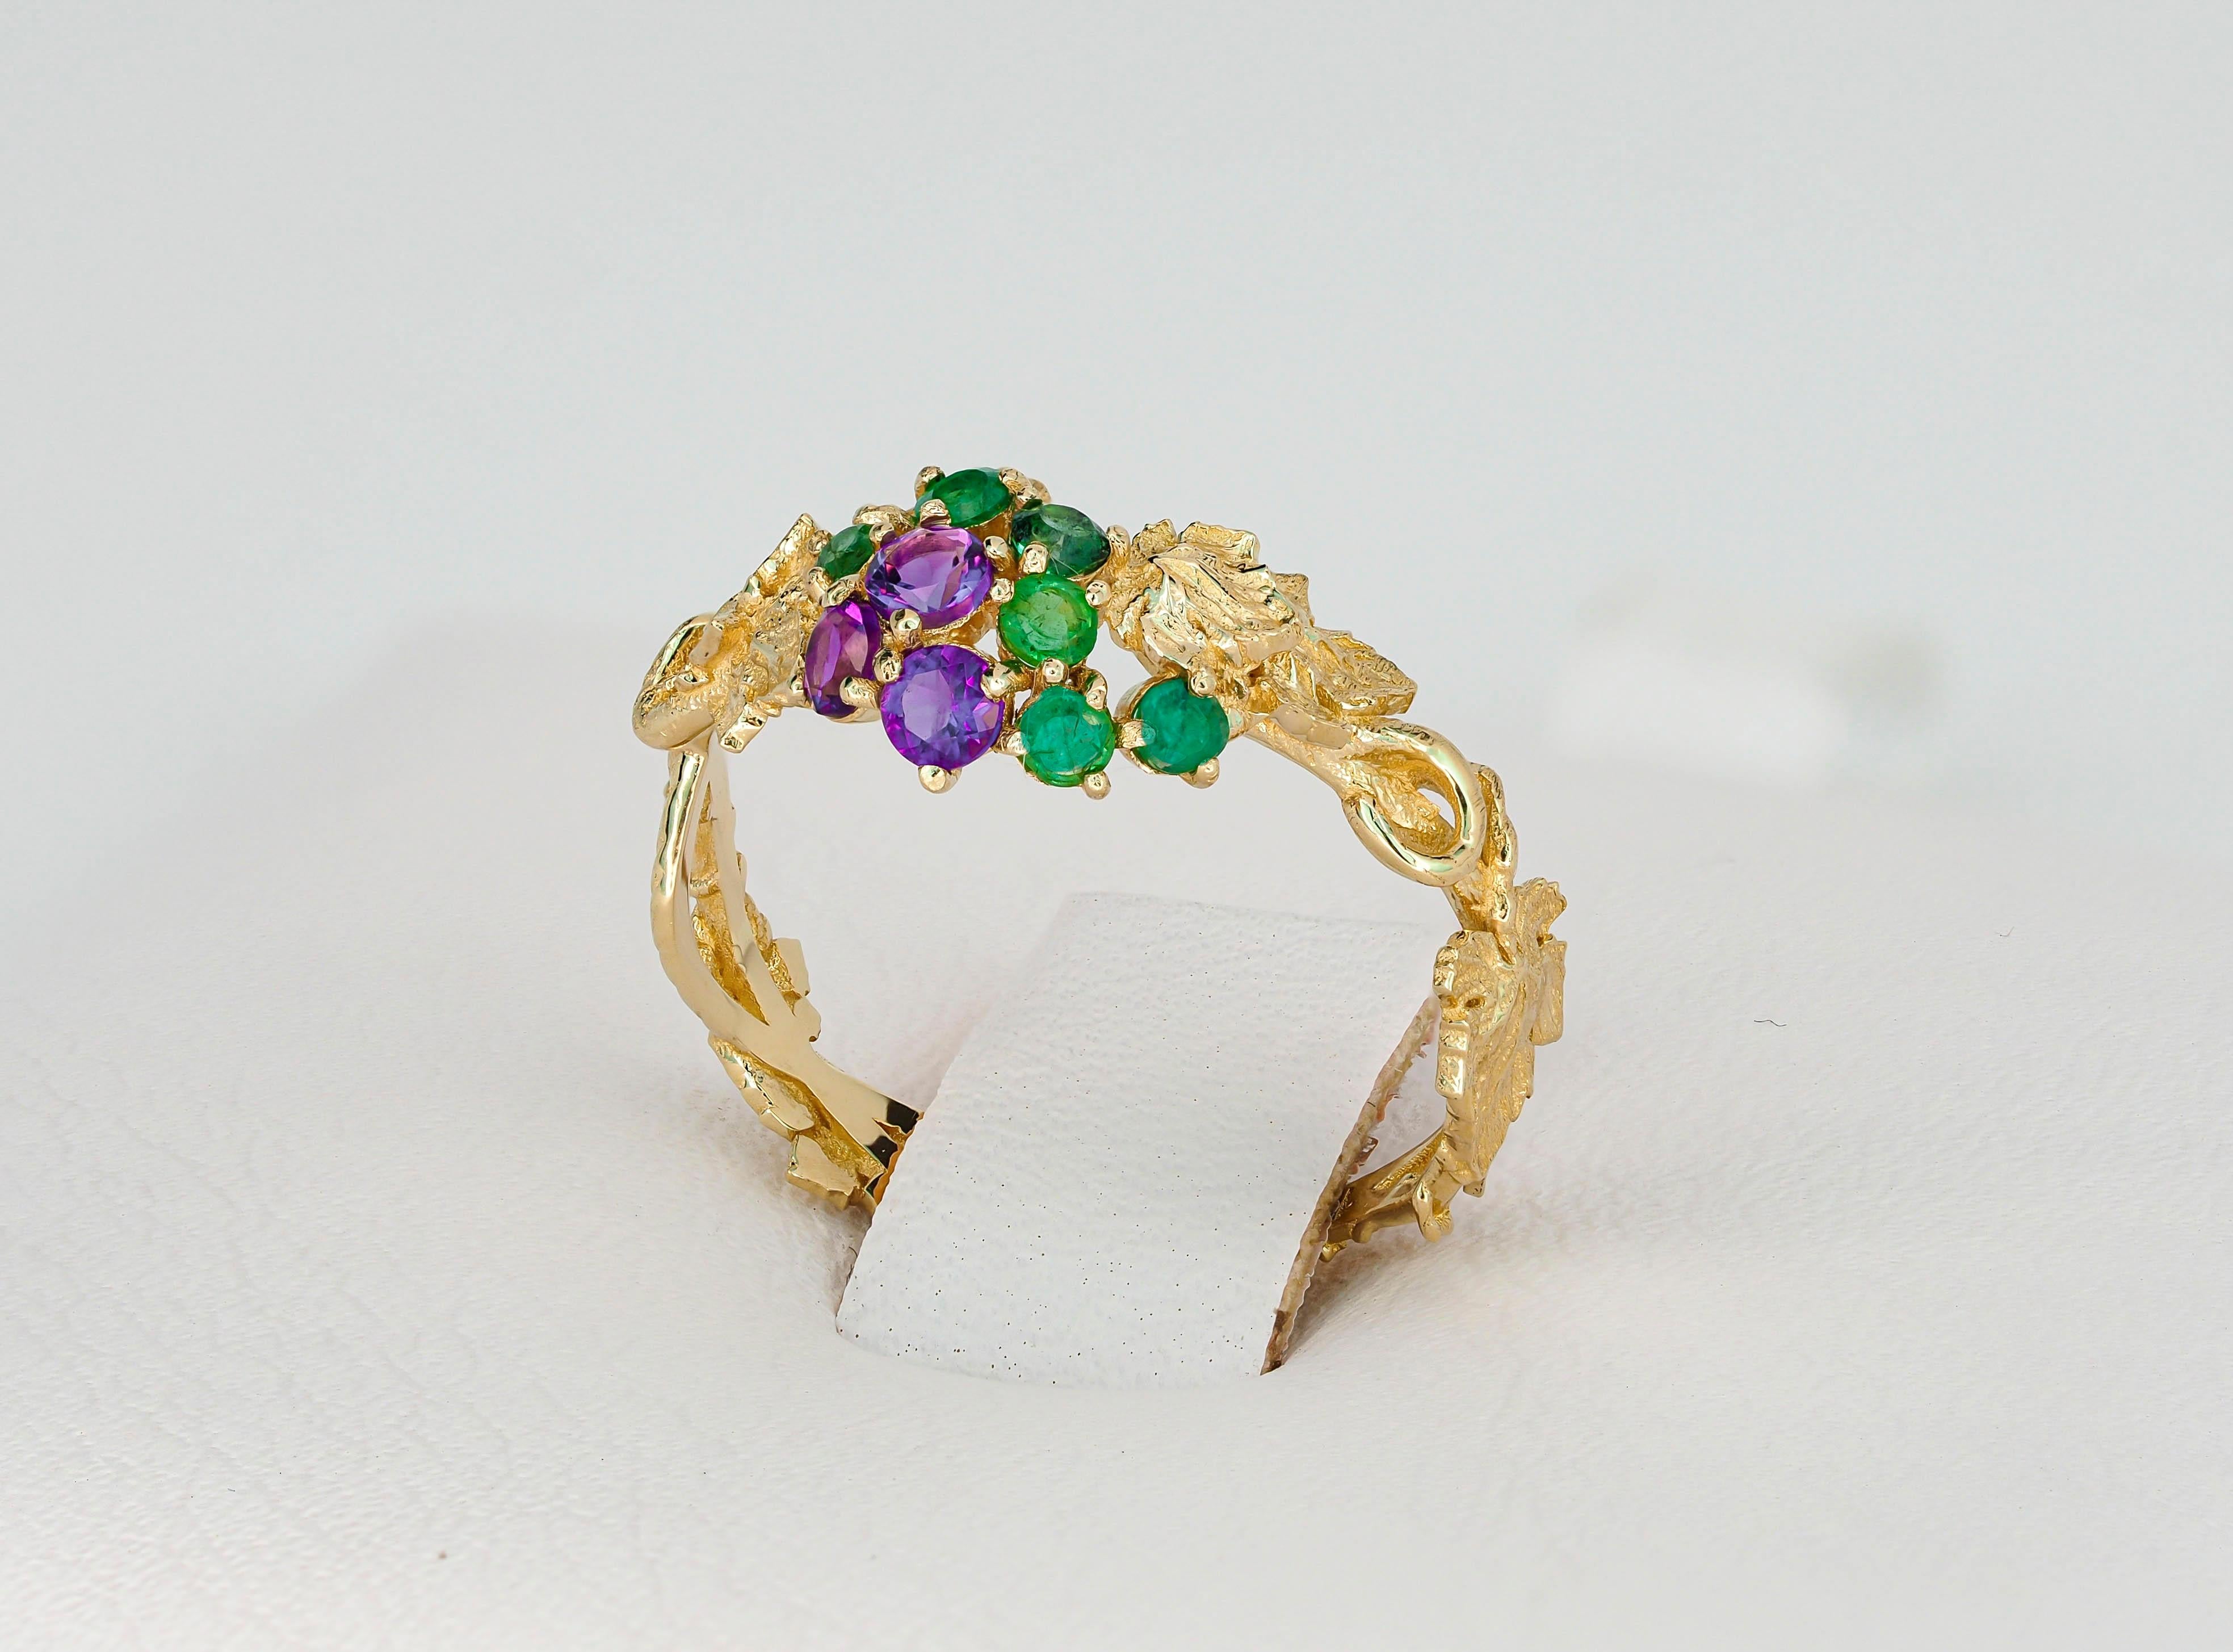 Modern Grape ring with emeralds, amethysts in 14k gold.  For Sale